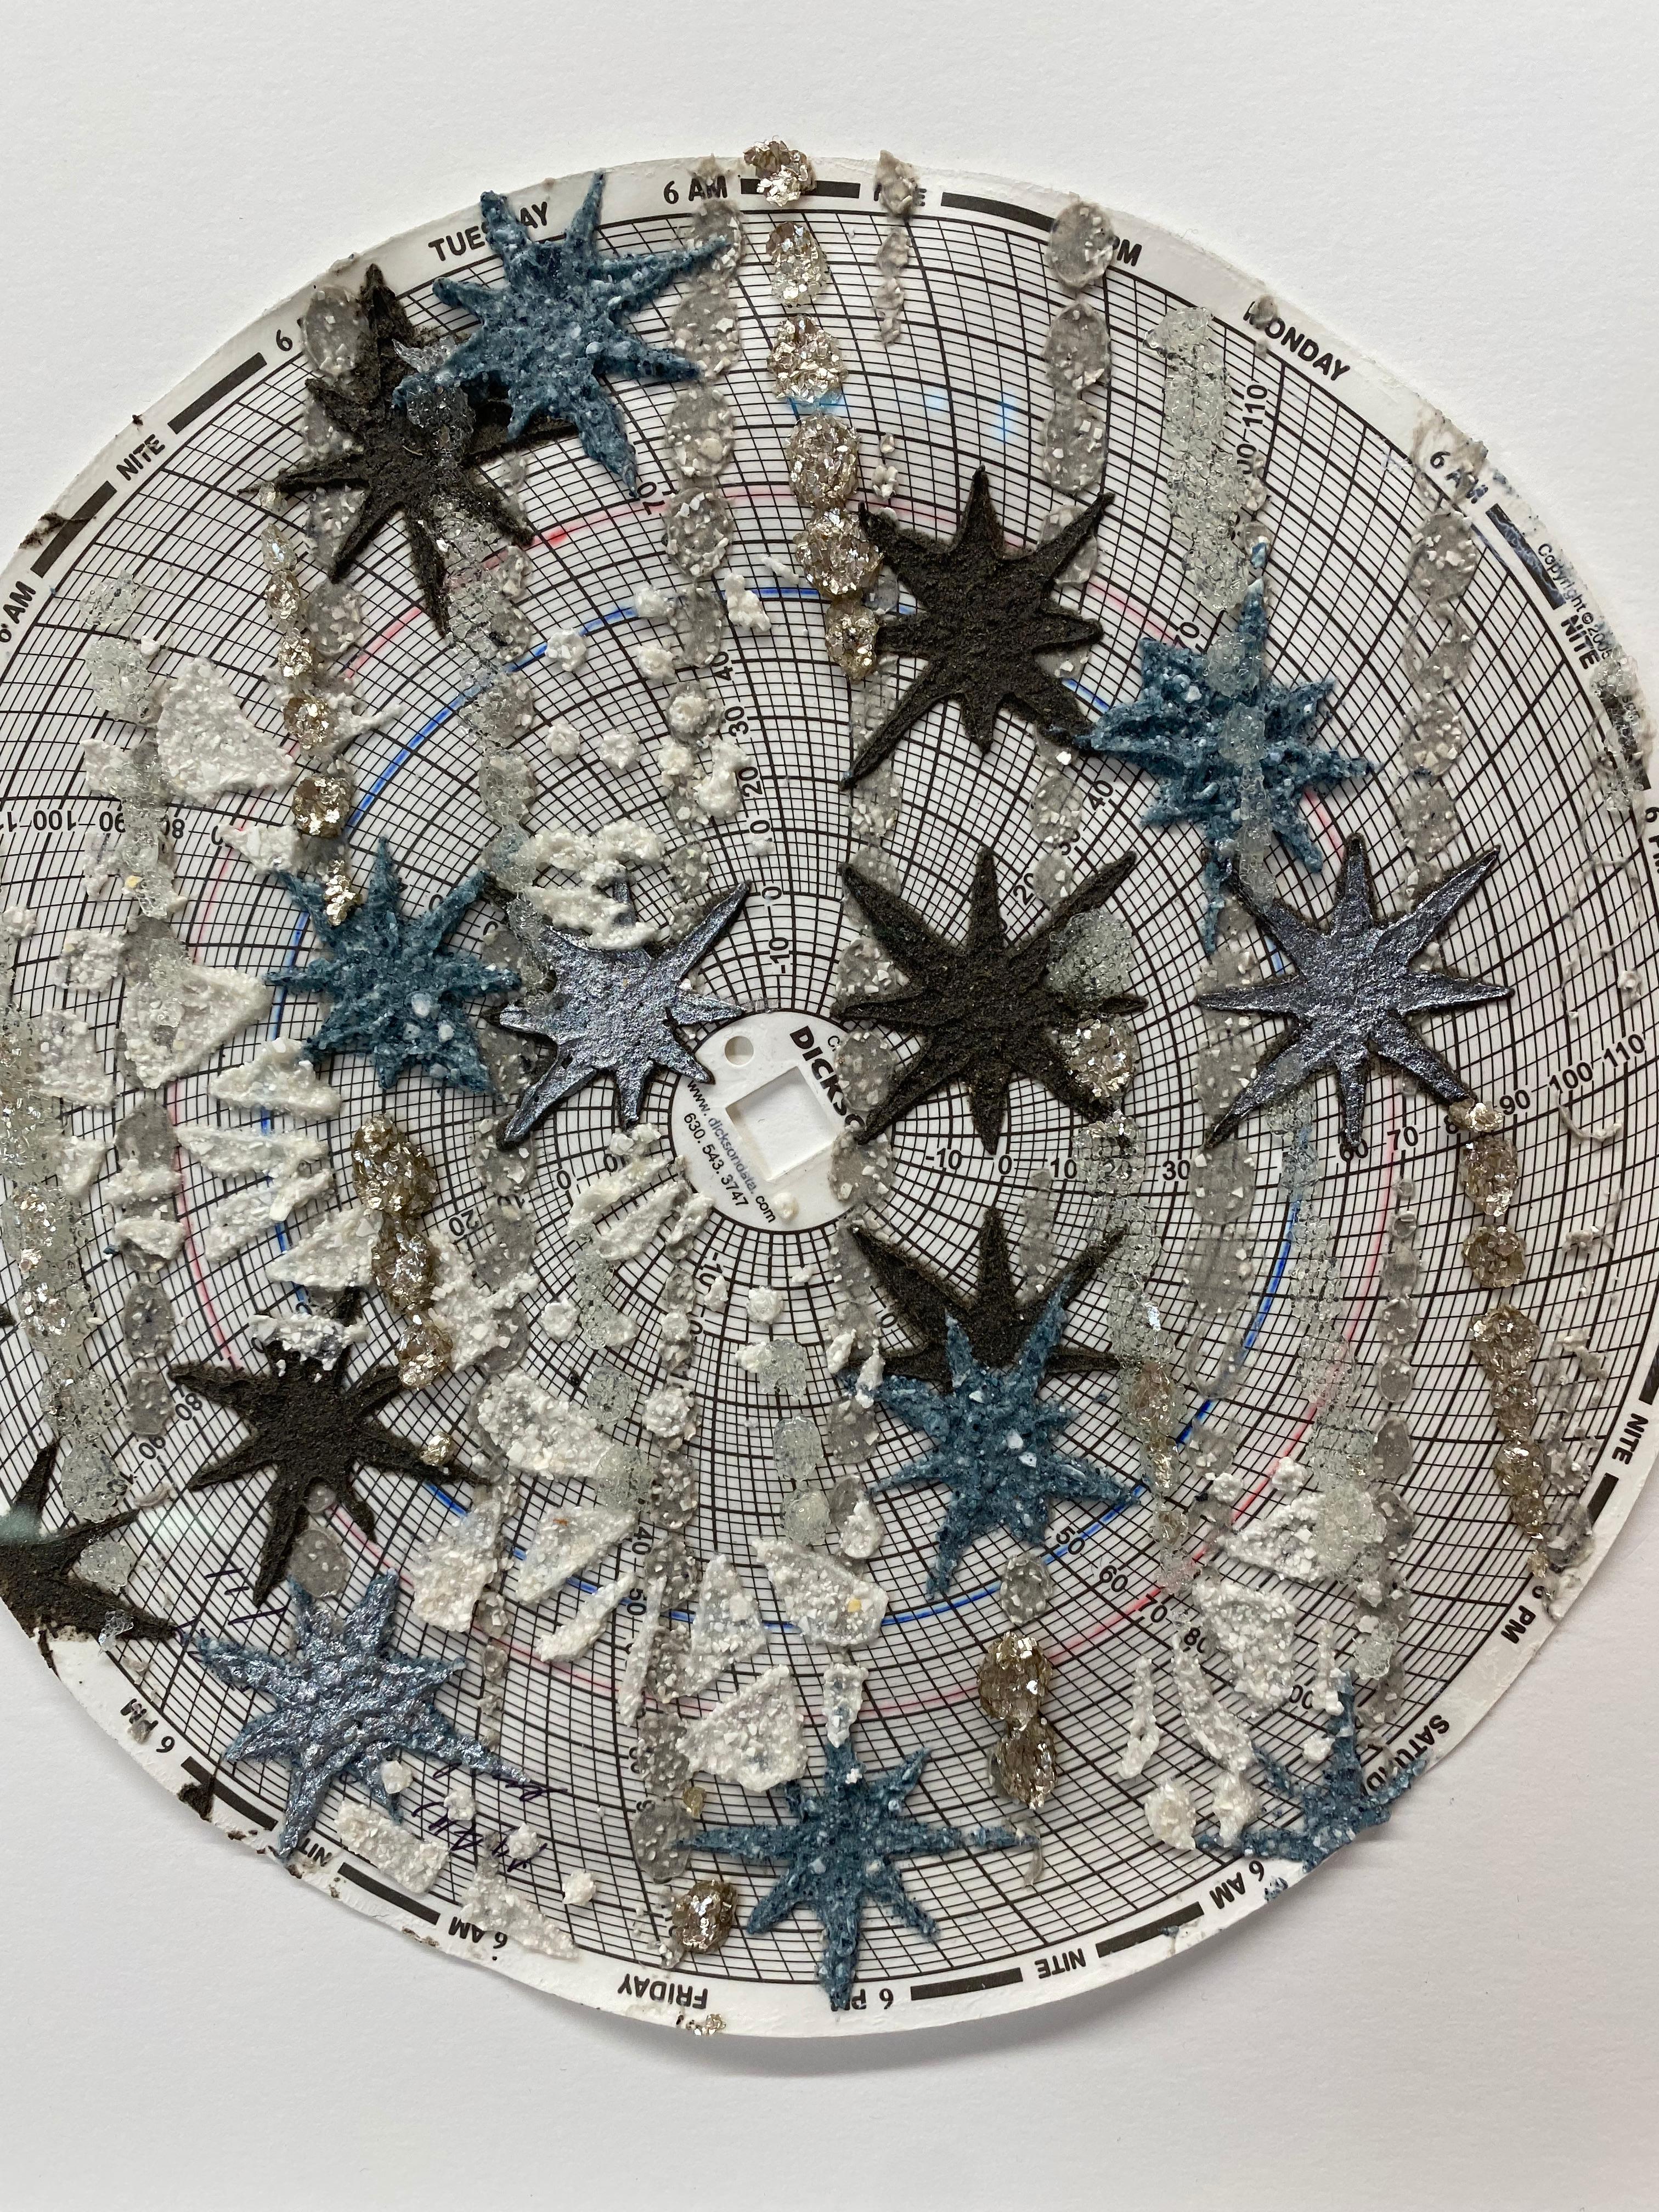 Carefully applied layers of emu eggshell, wood ash, glass beads, mica on hygrothermograph paper create surface texture in this mandala made up of intricate patterns, blue and dark charcoal gray stars layered over radiating circles in silver. 8